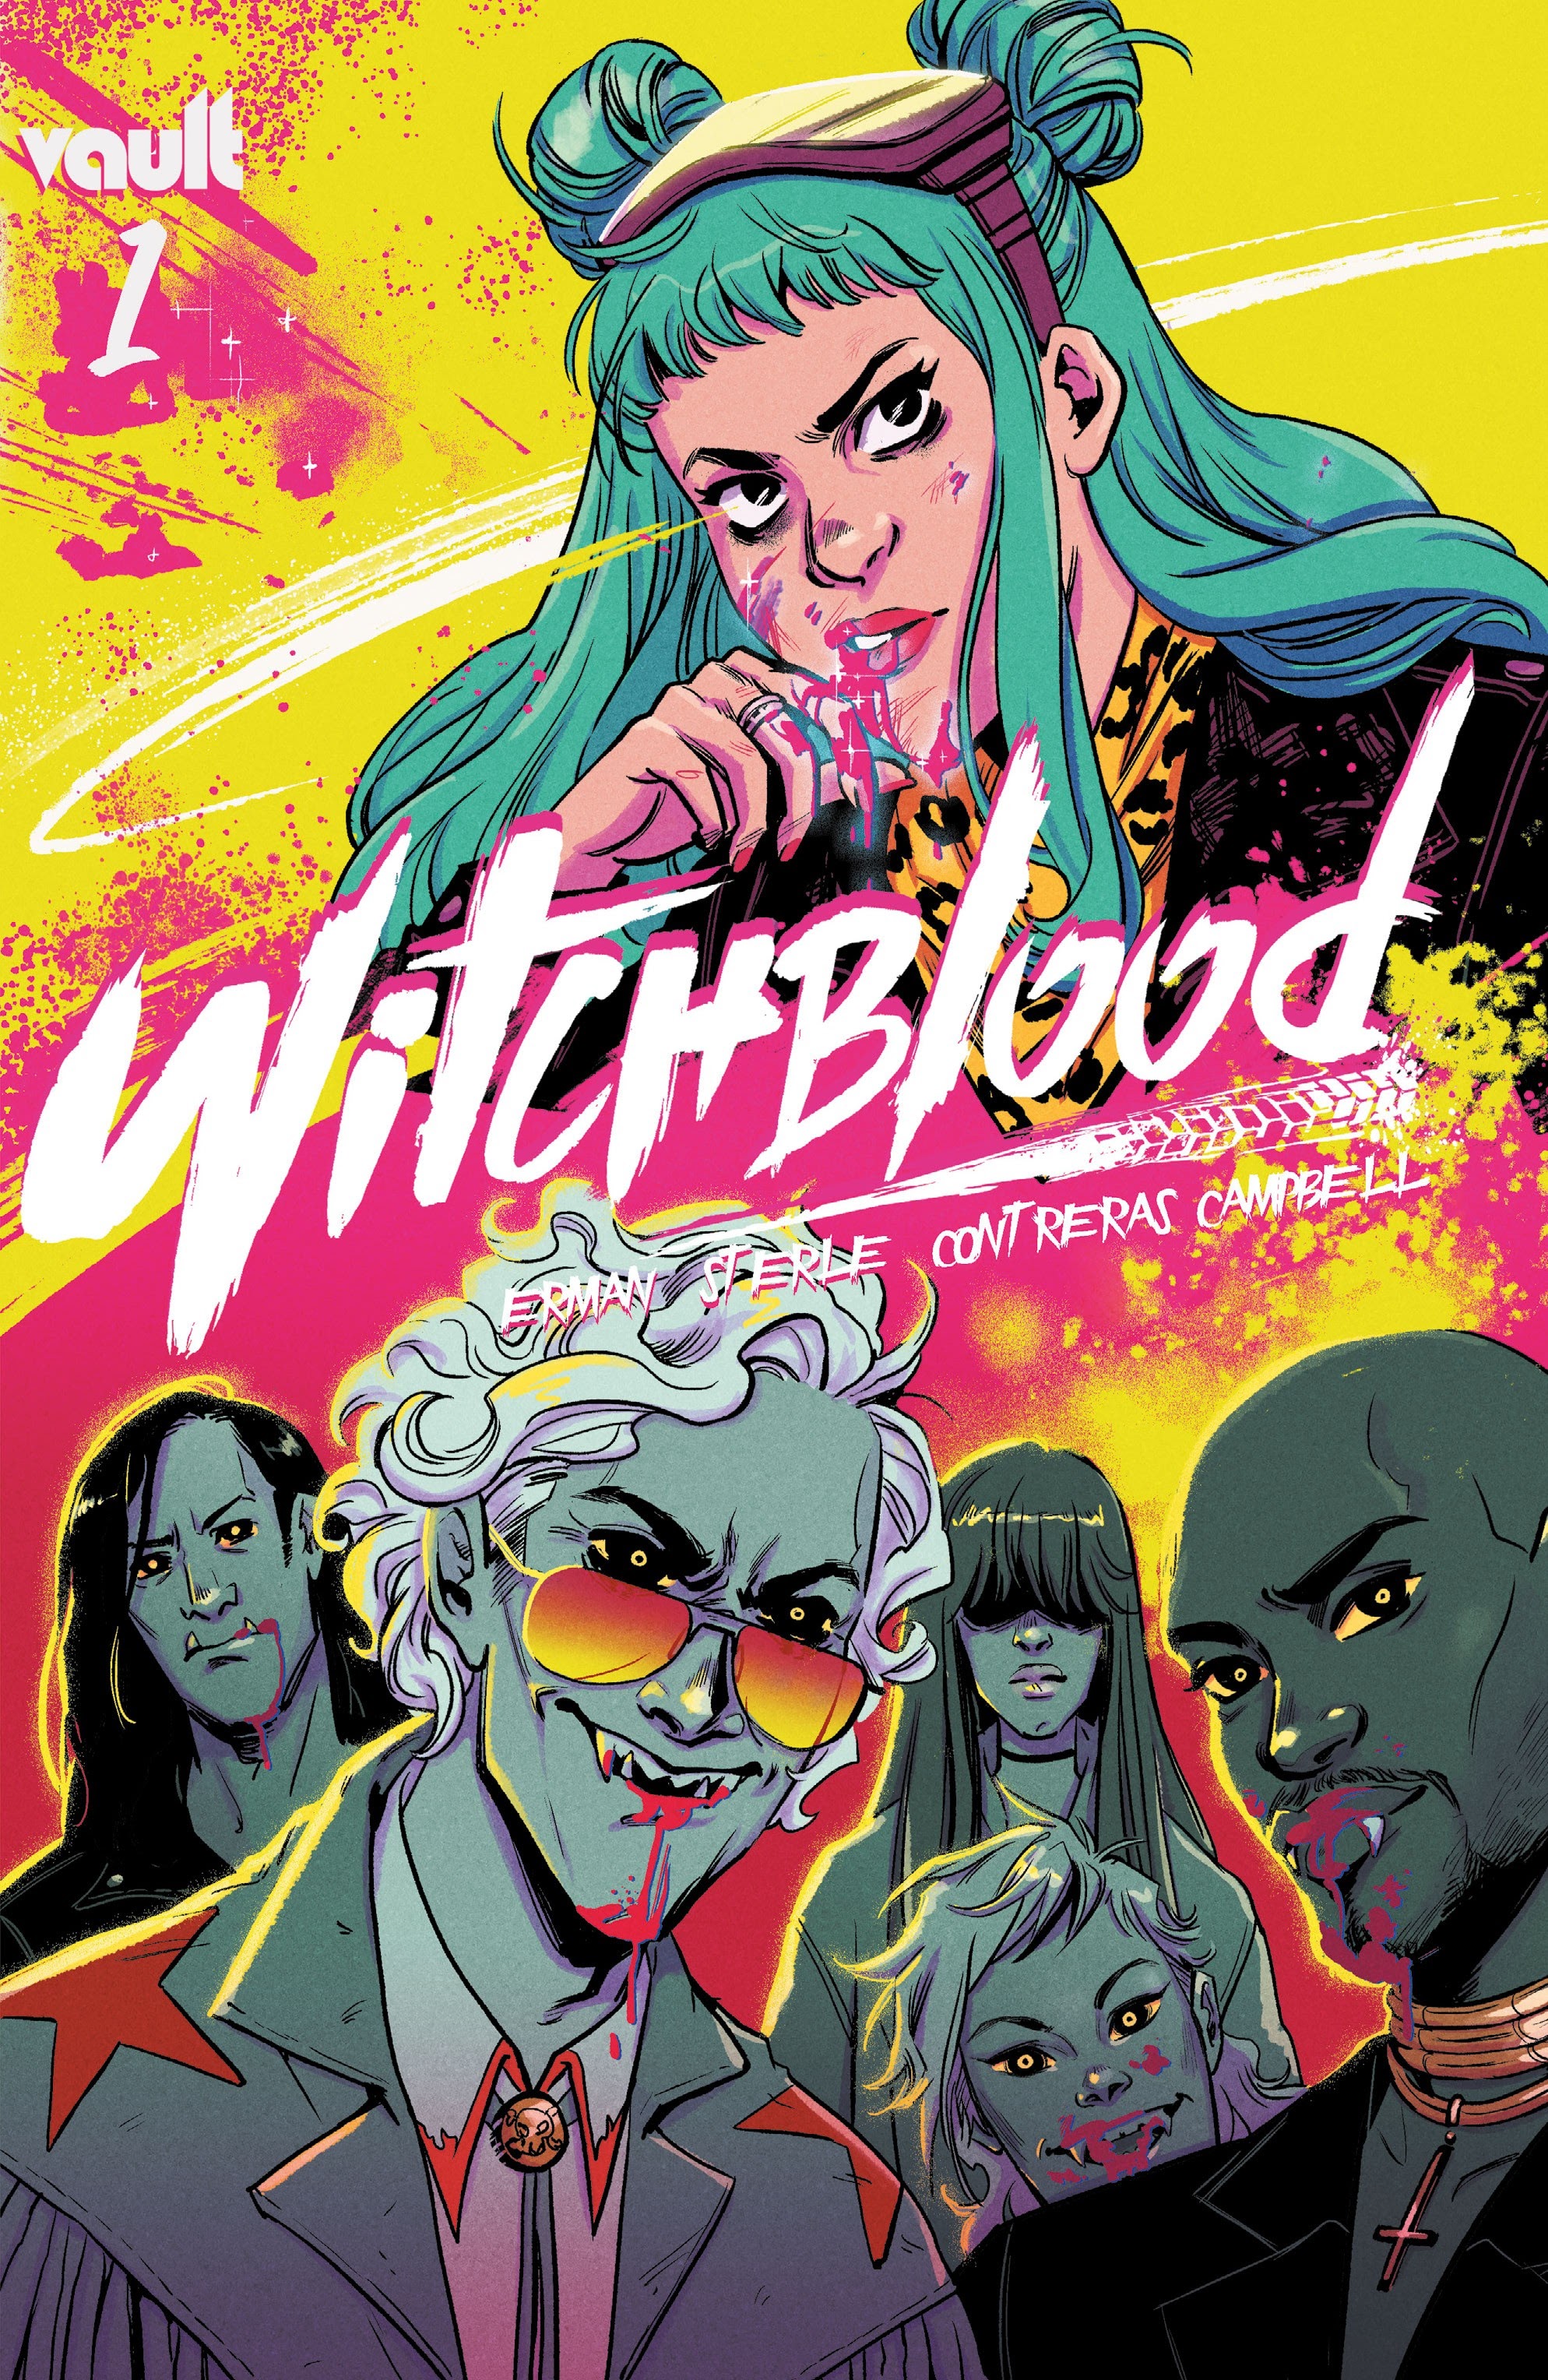 Read online Witchblood comic -  Issue #1 - 1